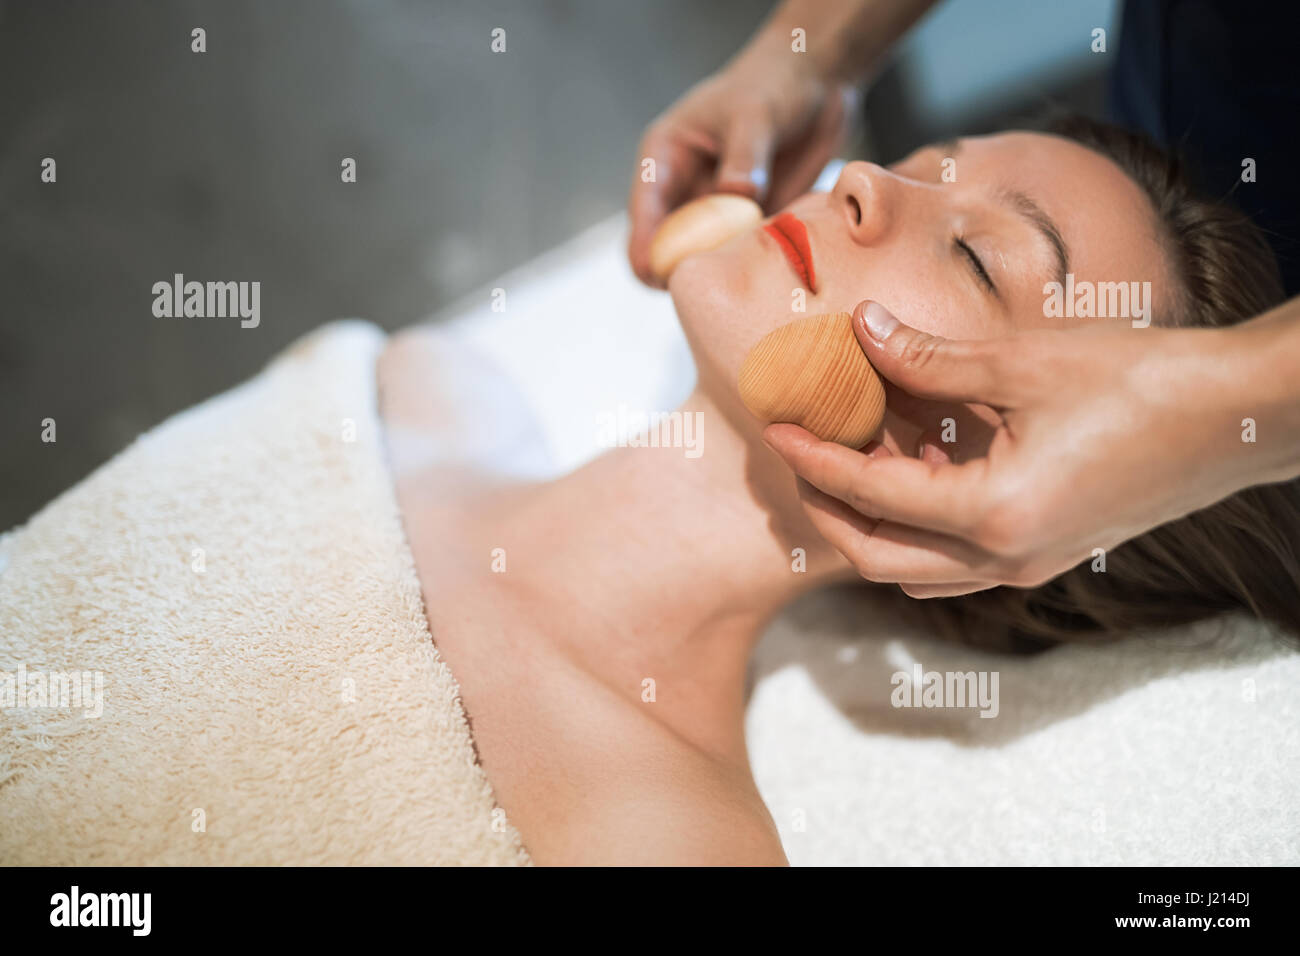 Masseur treating patient with therapeutic massage treatment Stock Photo